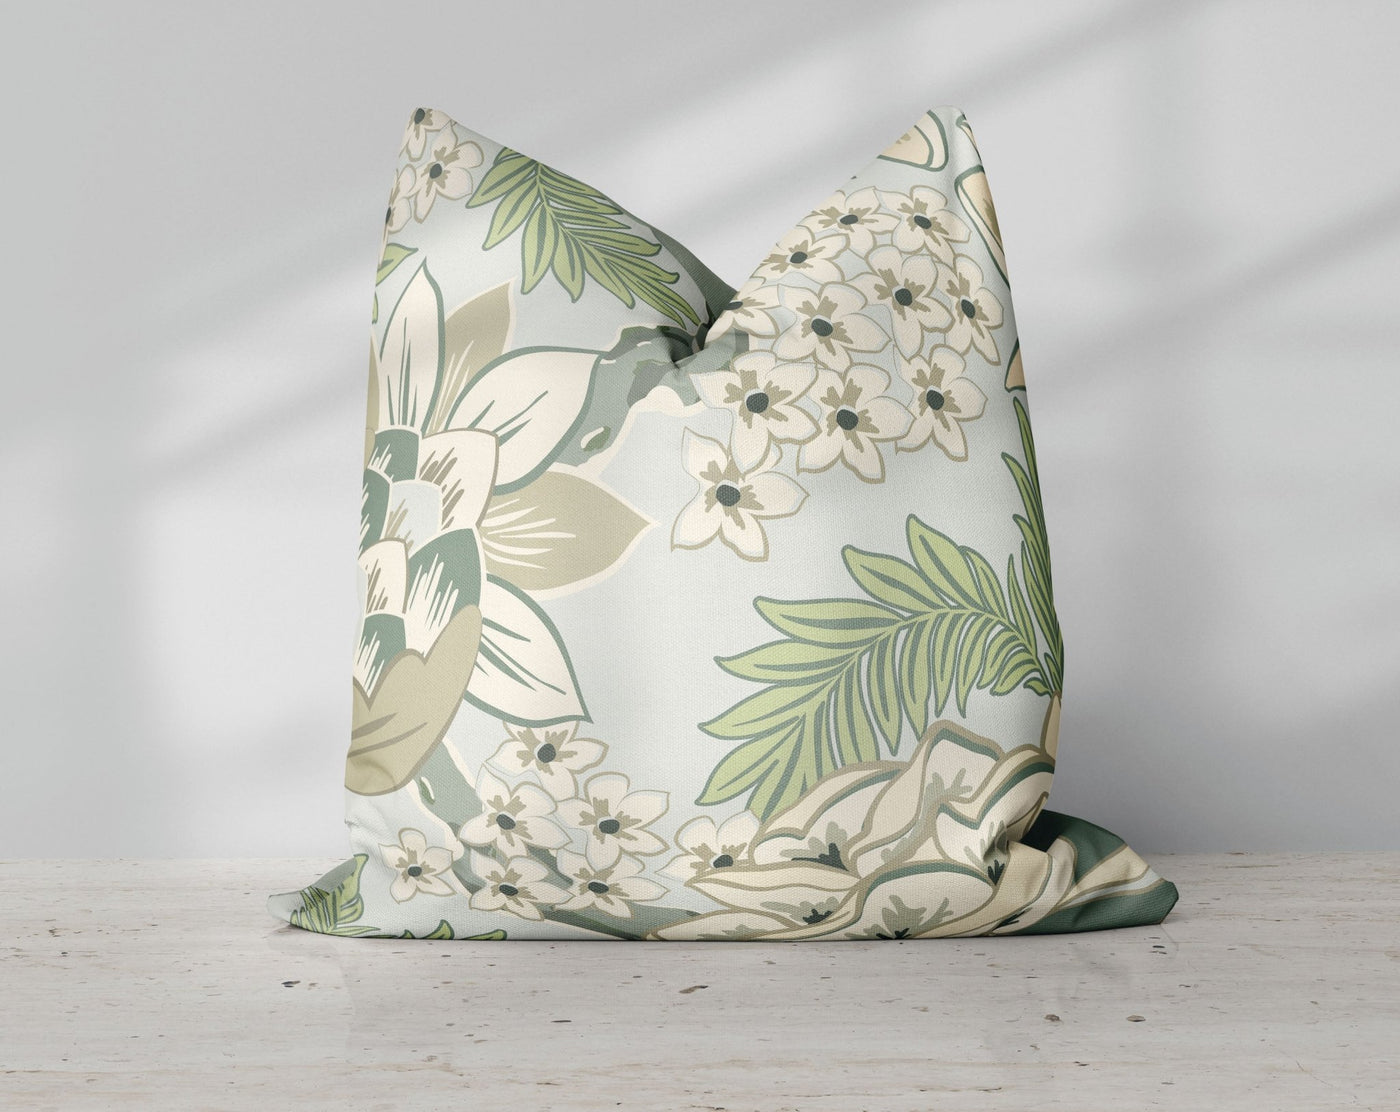 Exclusive Green Thibaut Honshu Robin's Egg Inspired Chinoiserie Pillow Throw Cover with Insert - Cush Potato Pillows